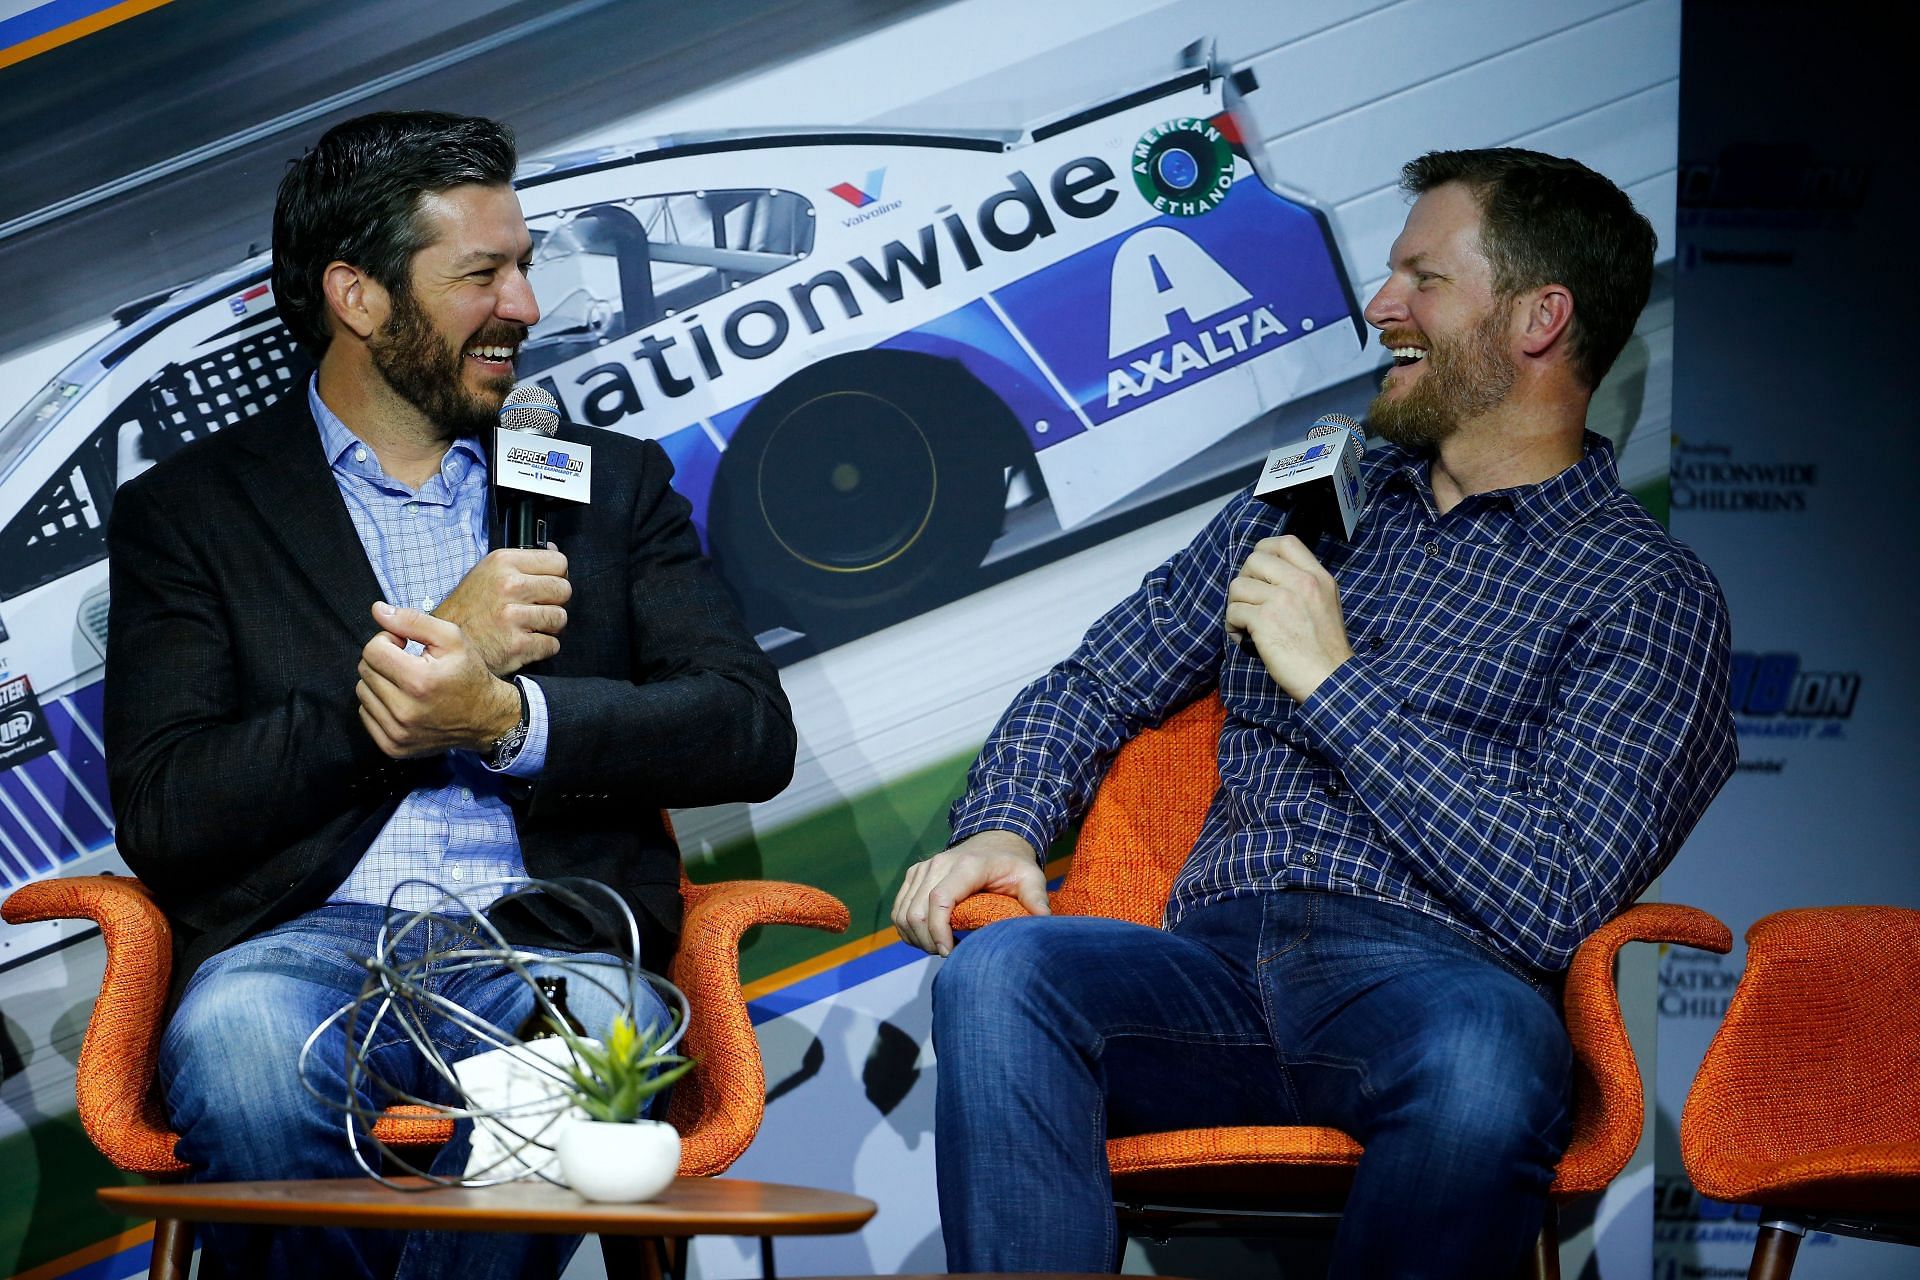 Appreci88ion - An Evening With Dale Earnhardt Jr. Presented By Nationwide